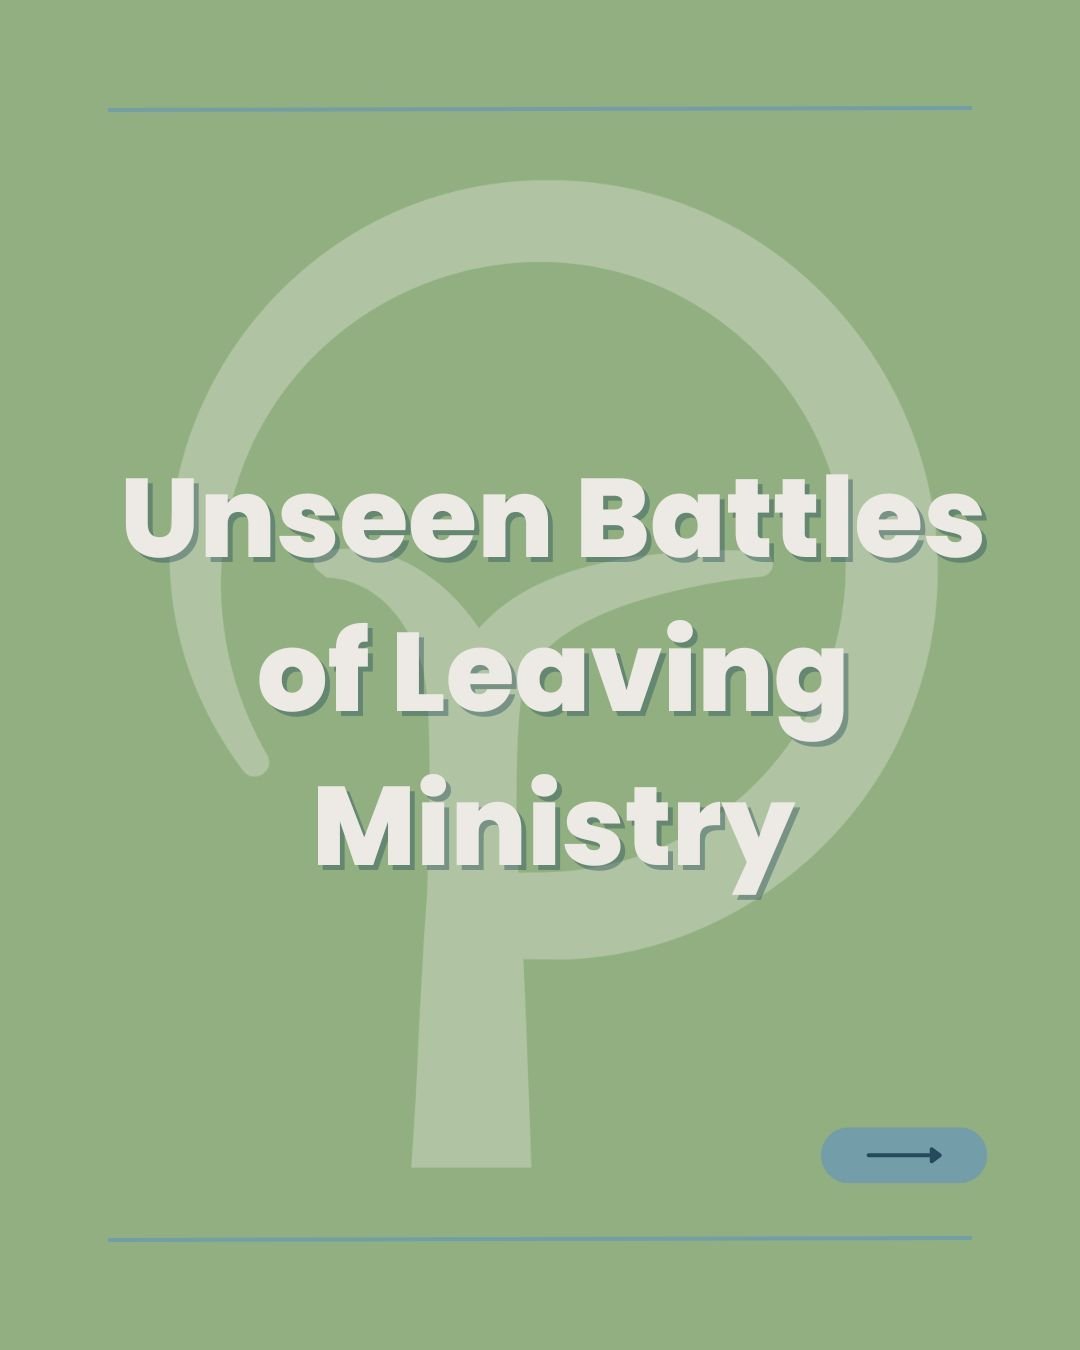 Behind the scenes and public eye, the pastor leaving ministry often has a chaotic inner-man - filled with anxiety and questions about the future.

Can you relate? 

#lifeafterministry #ministrytransition #pastoralcare